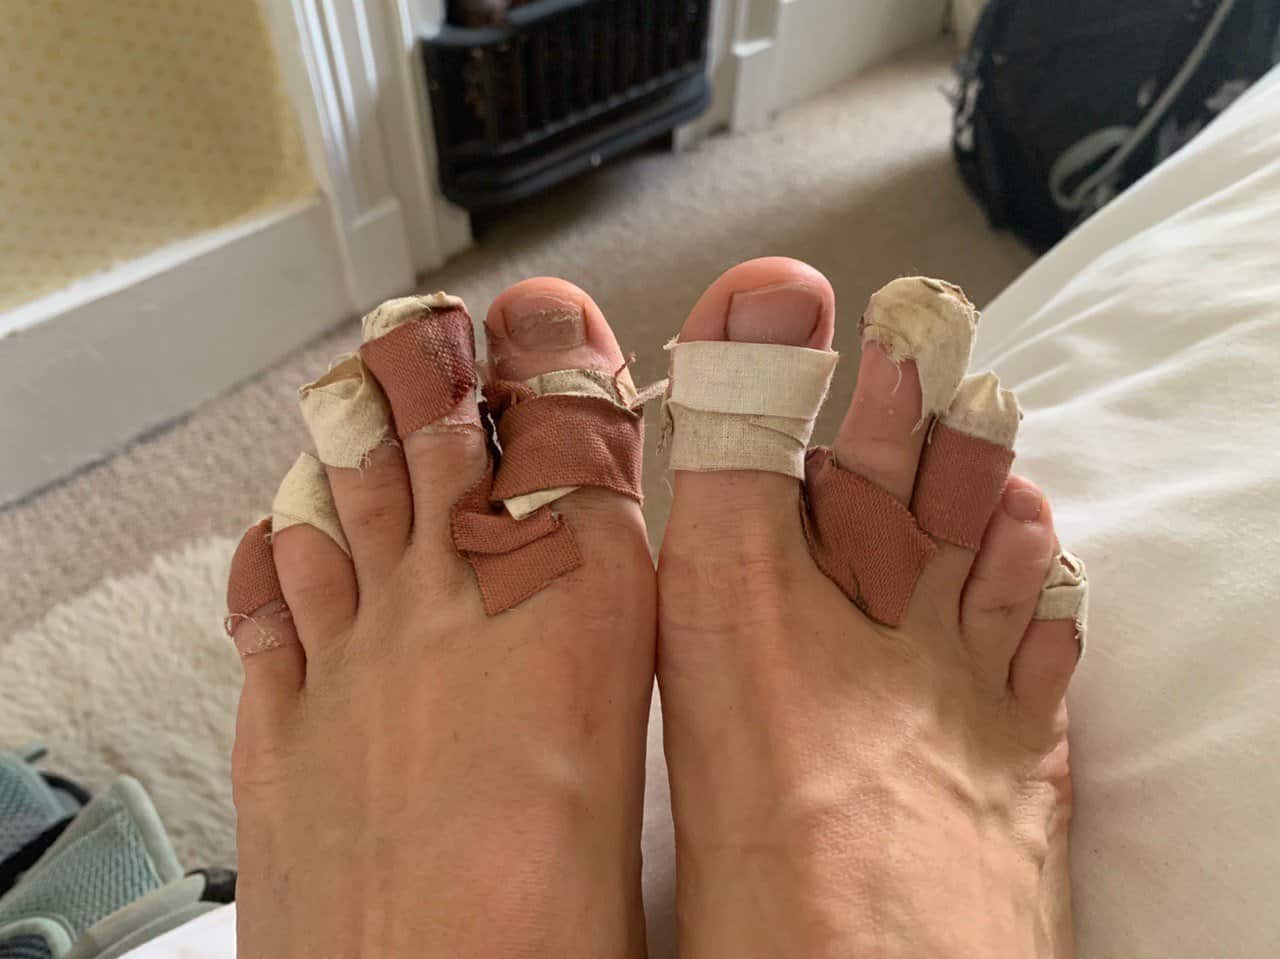 Blisters and bandaids on toes